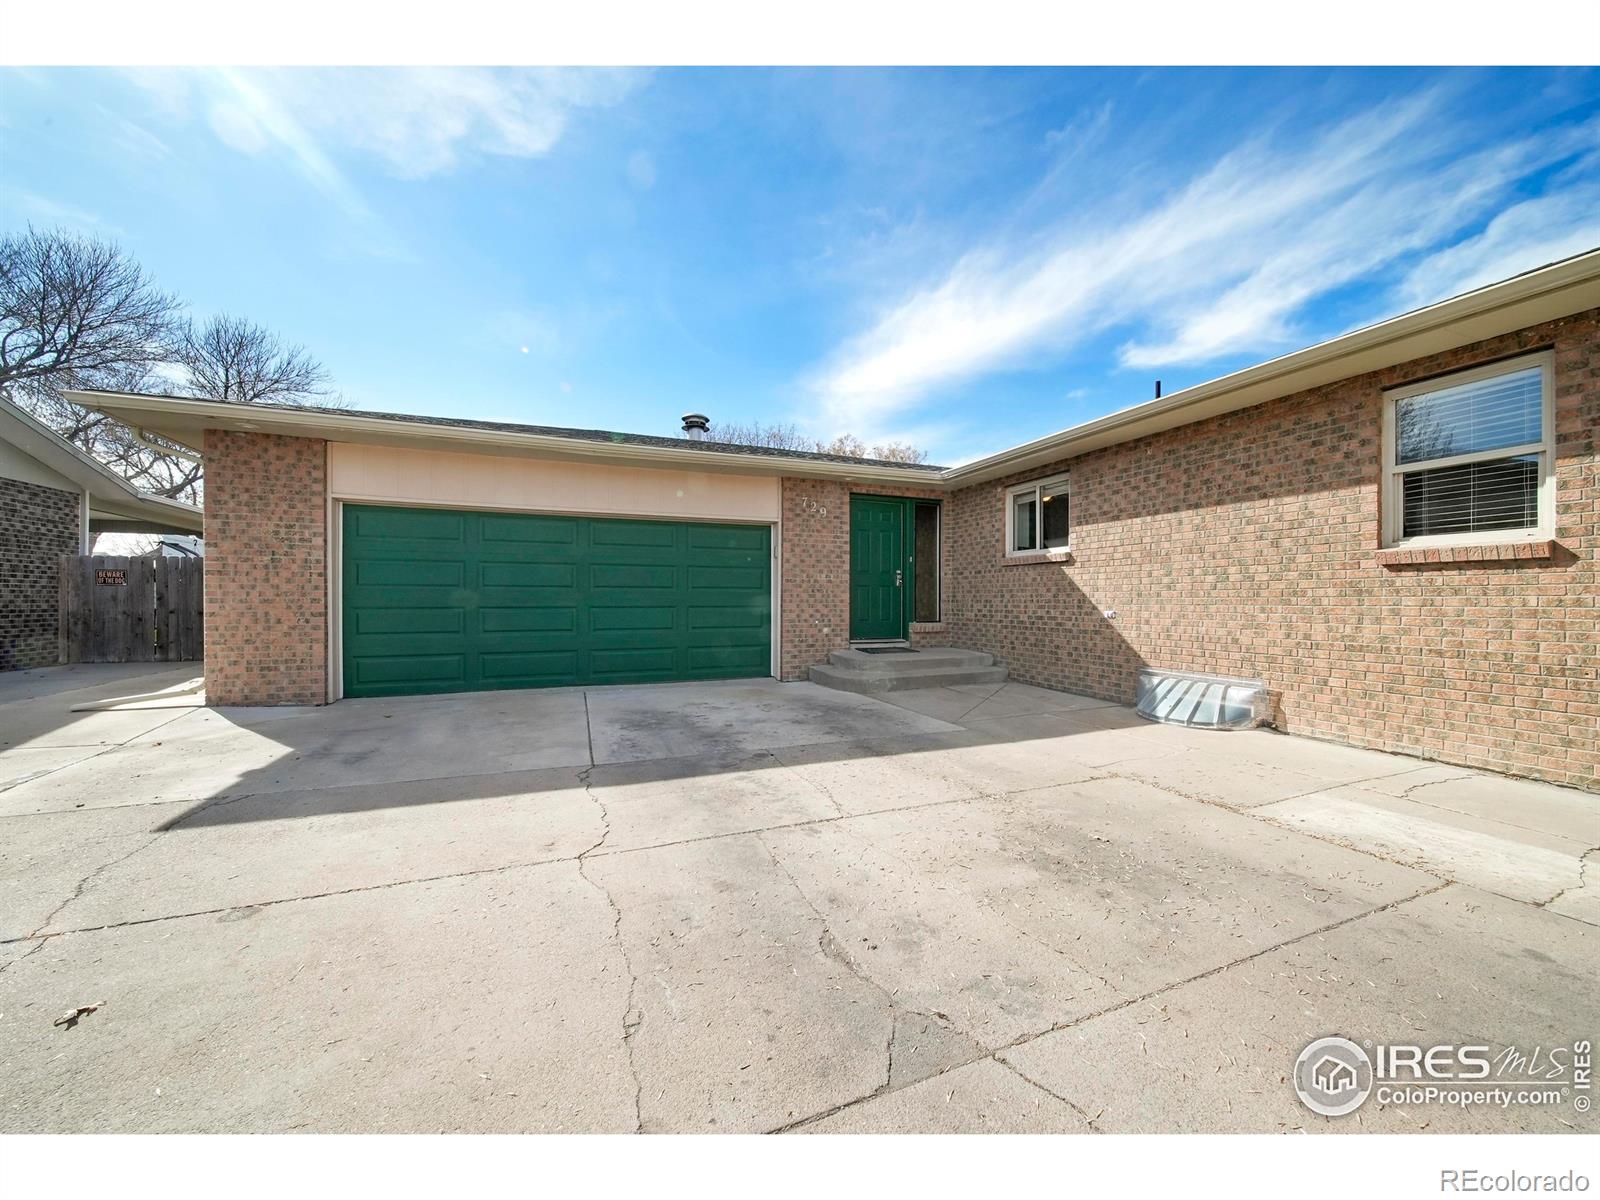 Report Image for 729  Vickie Street,Fort Morgan, Colorado